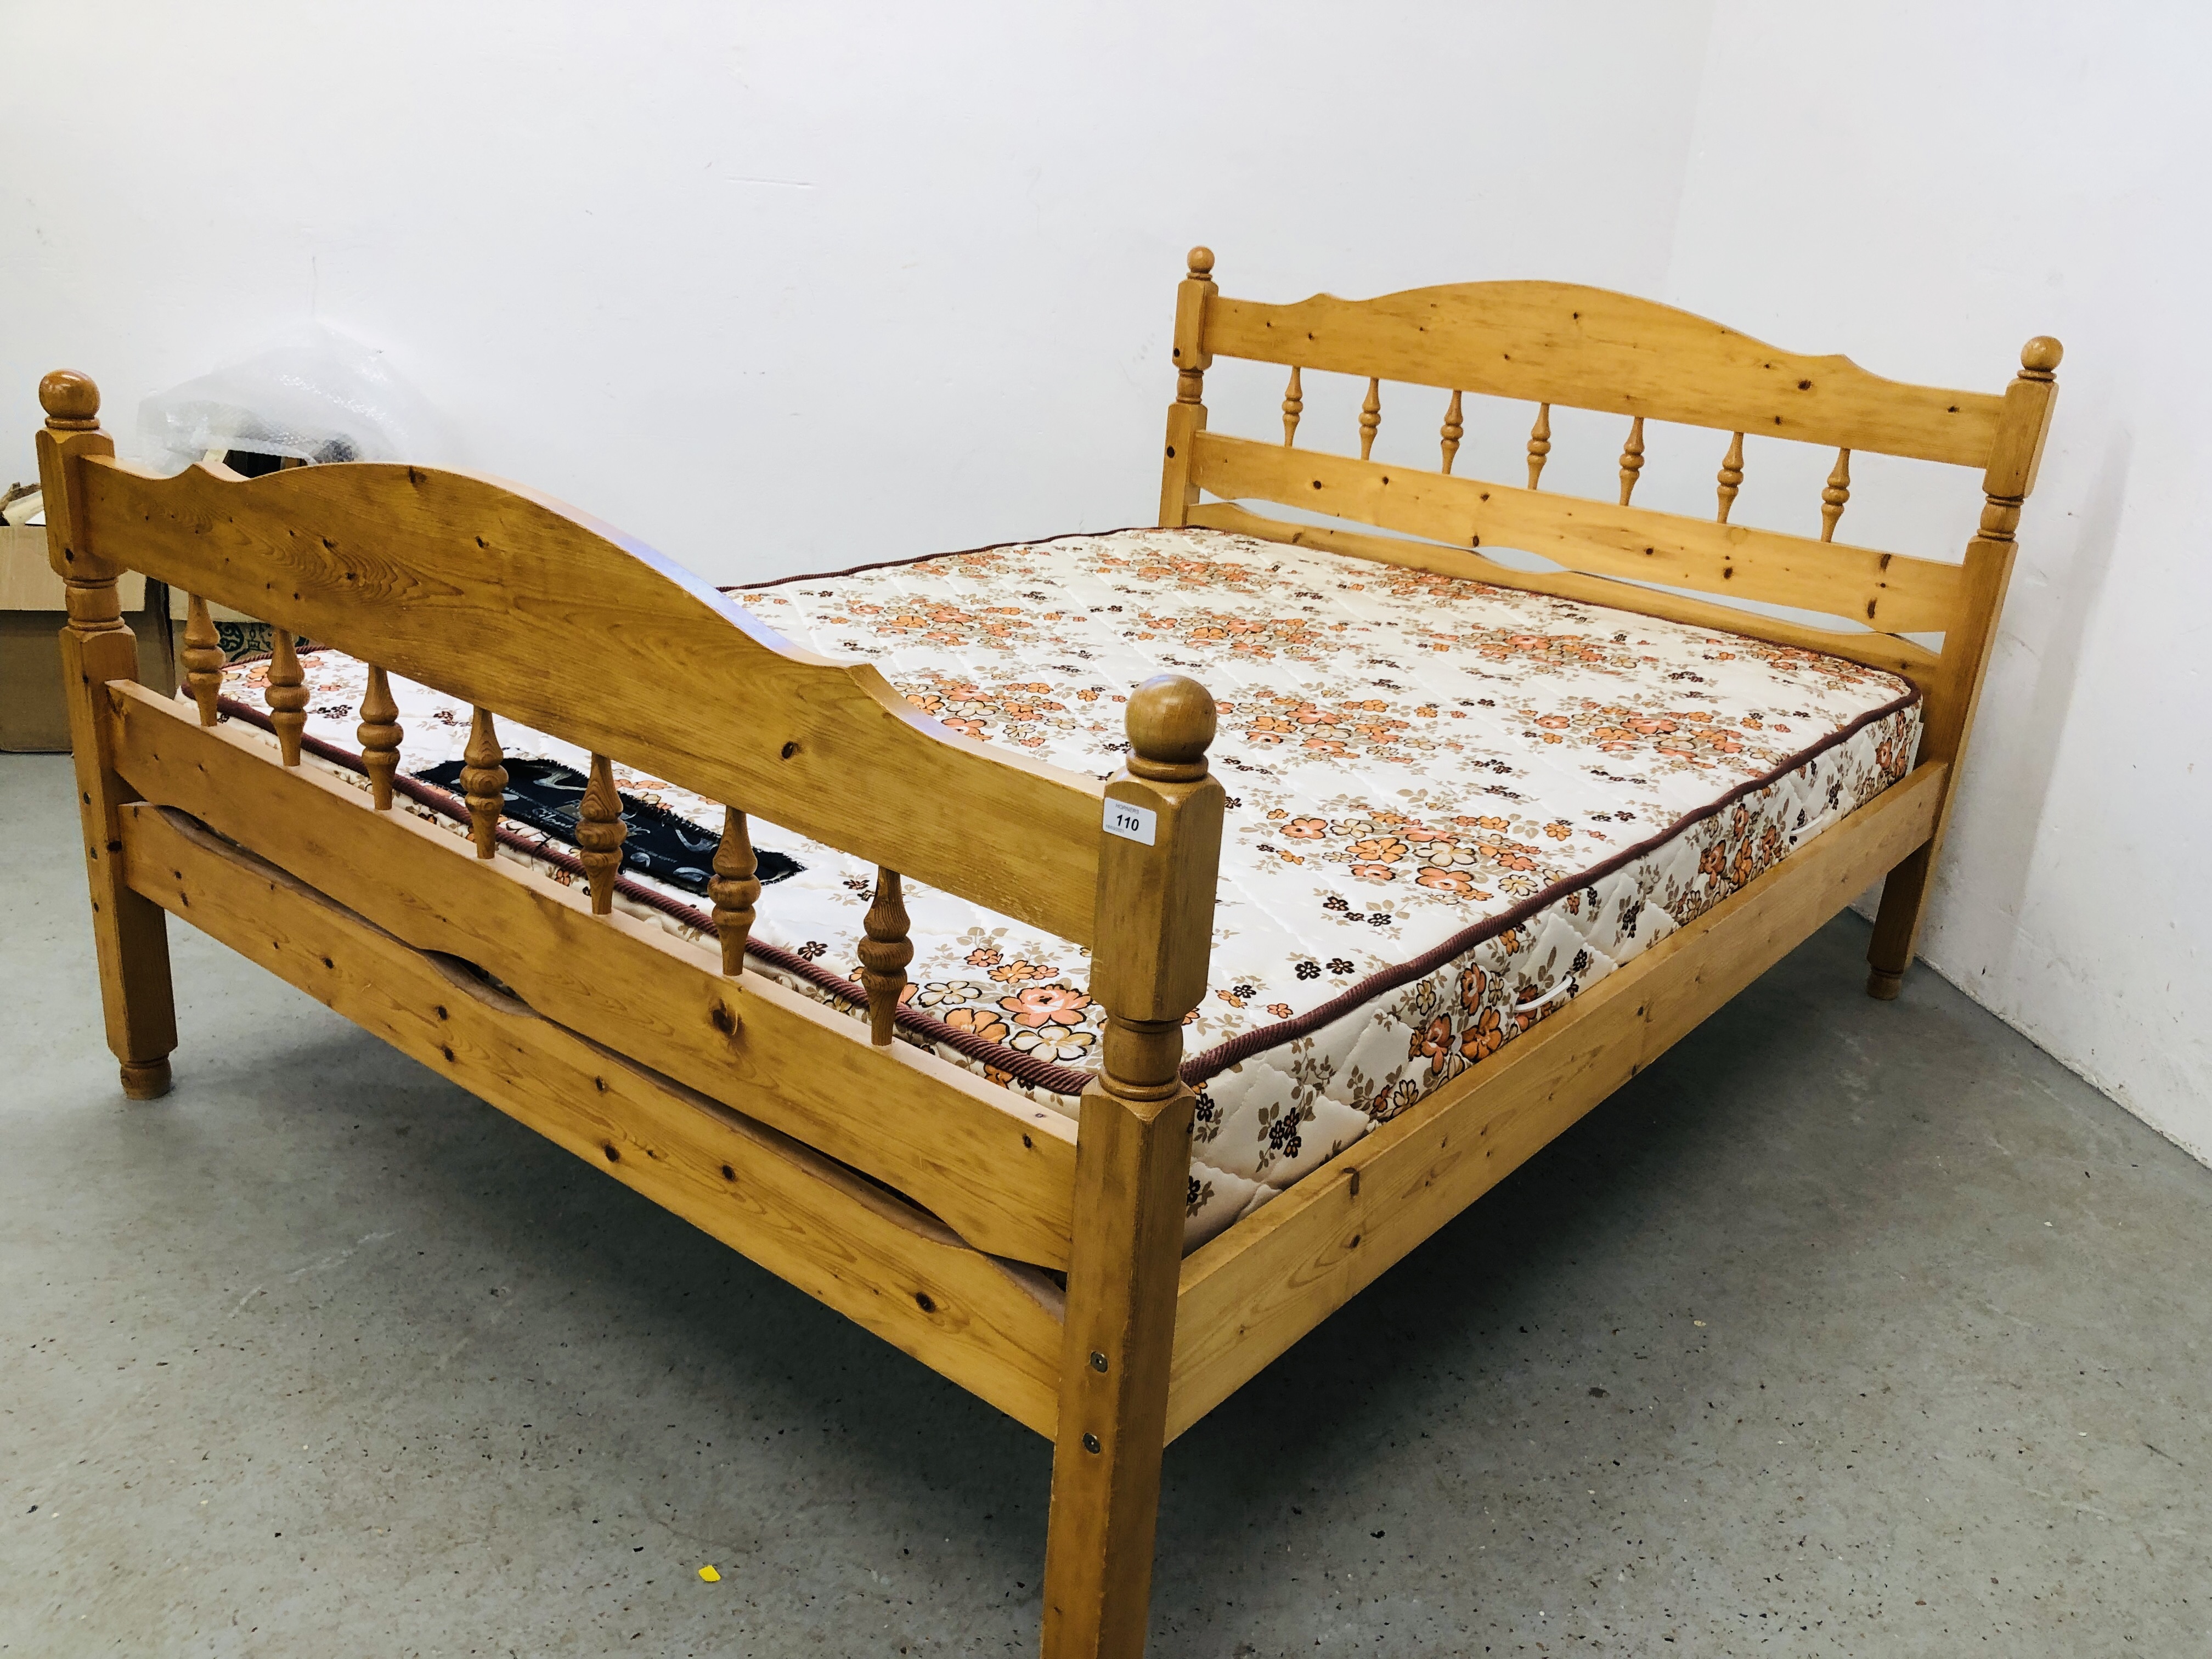 A PINE FRAMED DOUBLE BED FRAME WITH SILENT NIGHT FIRMAPEDIC MATTRESS - Image 5 of 5